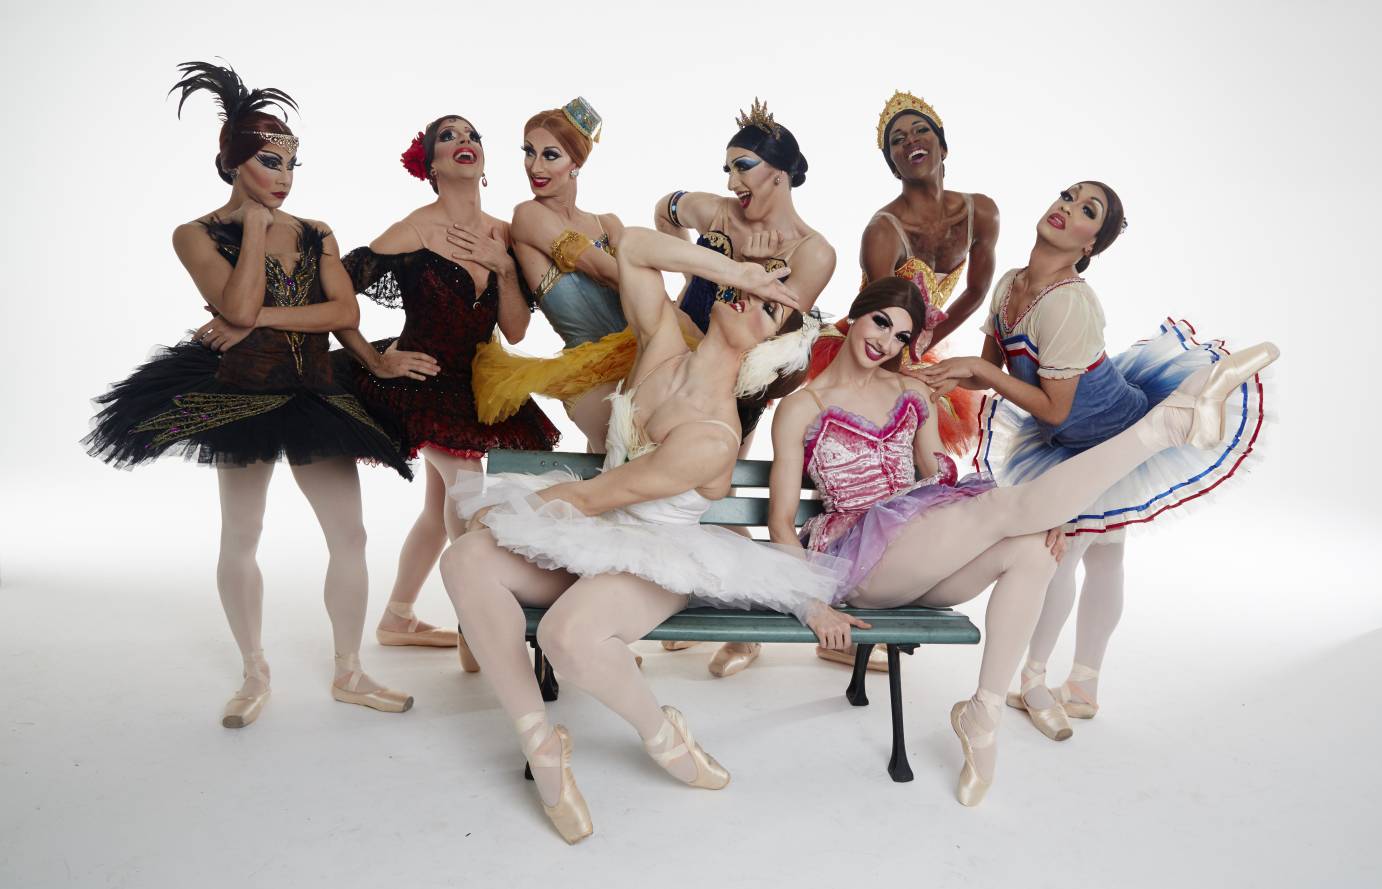 Wearing colorful classical tutus and heavy make up, the dancers pose with silly faces. Two dancers sit on a bench while six stand behind them.